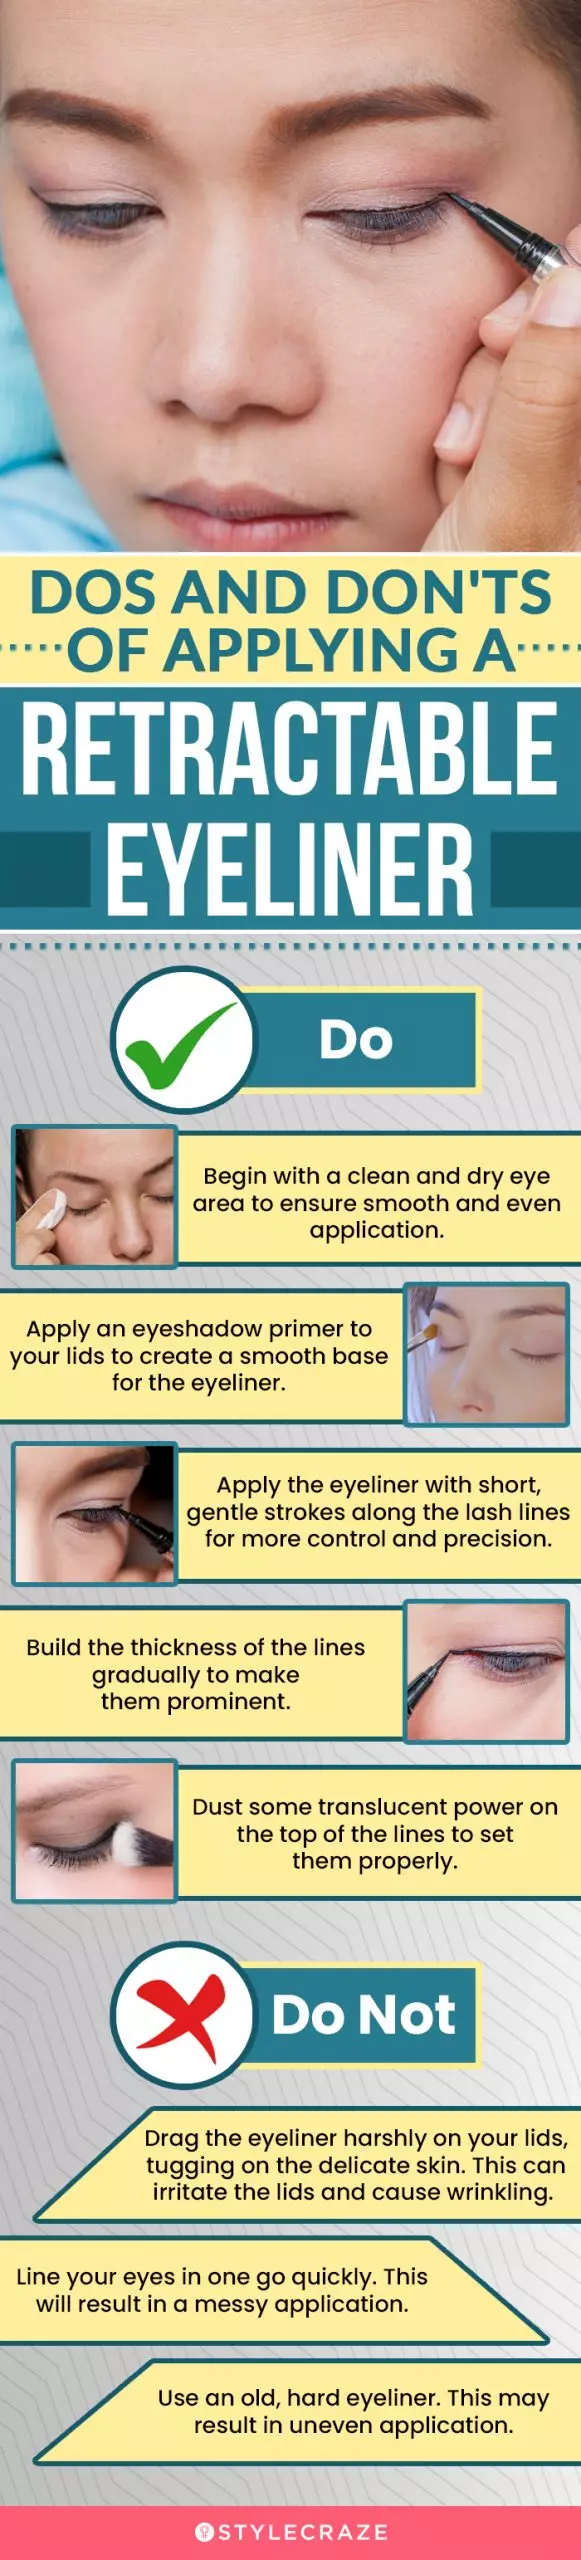 Dos And Don'ts Of Applying A Retractable Eyeliner (infographic)